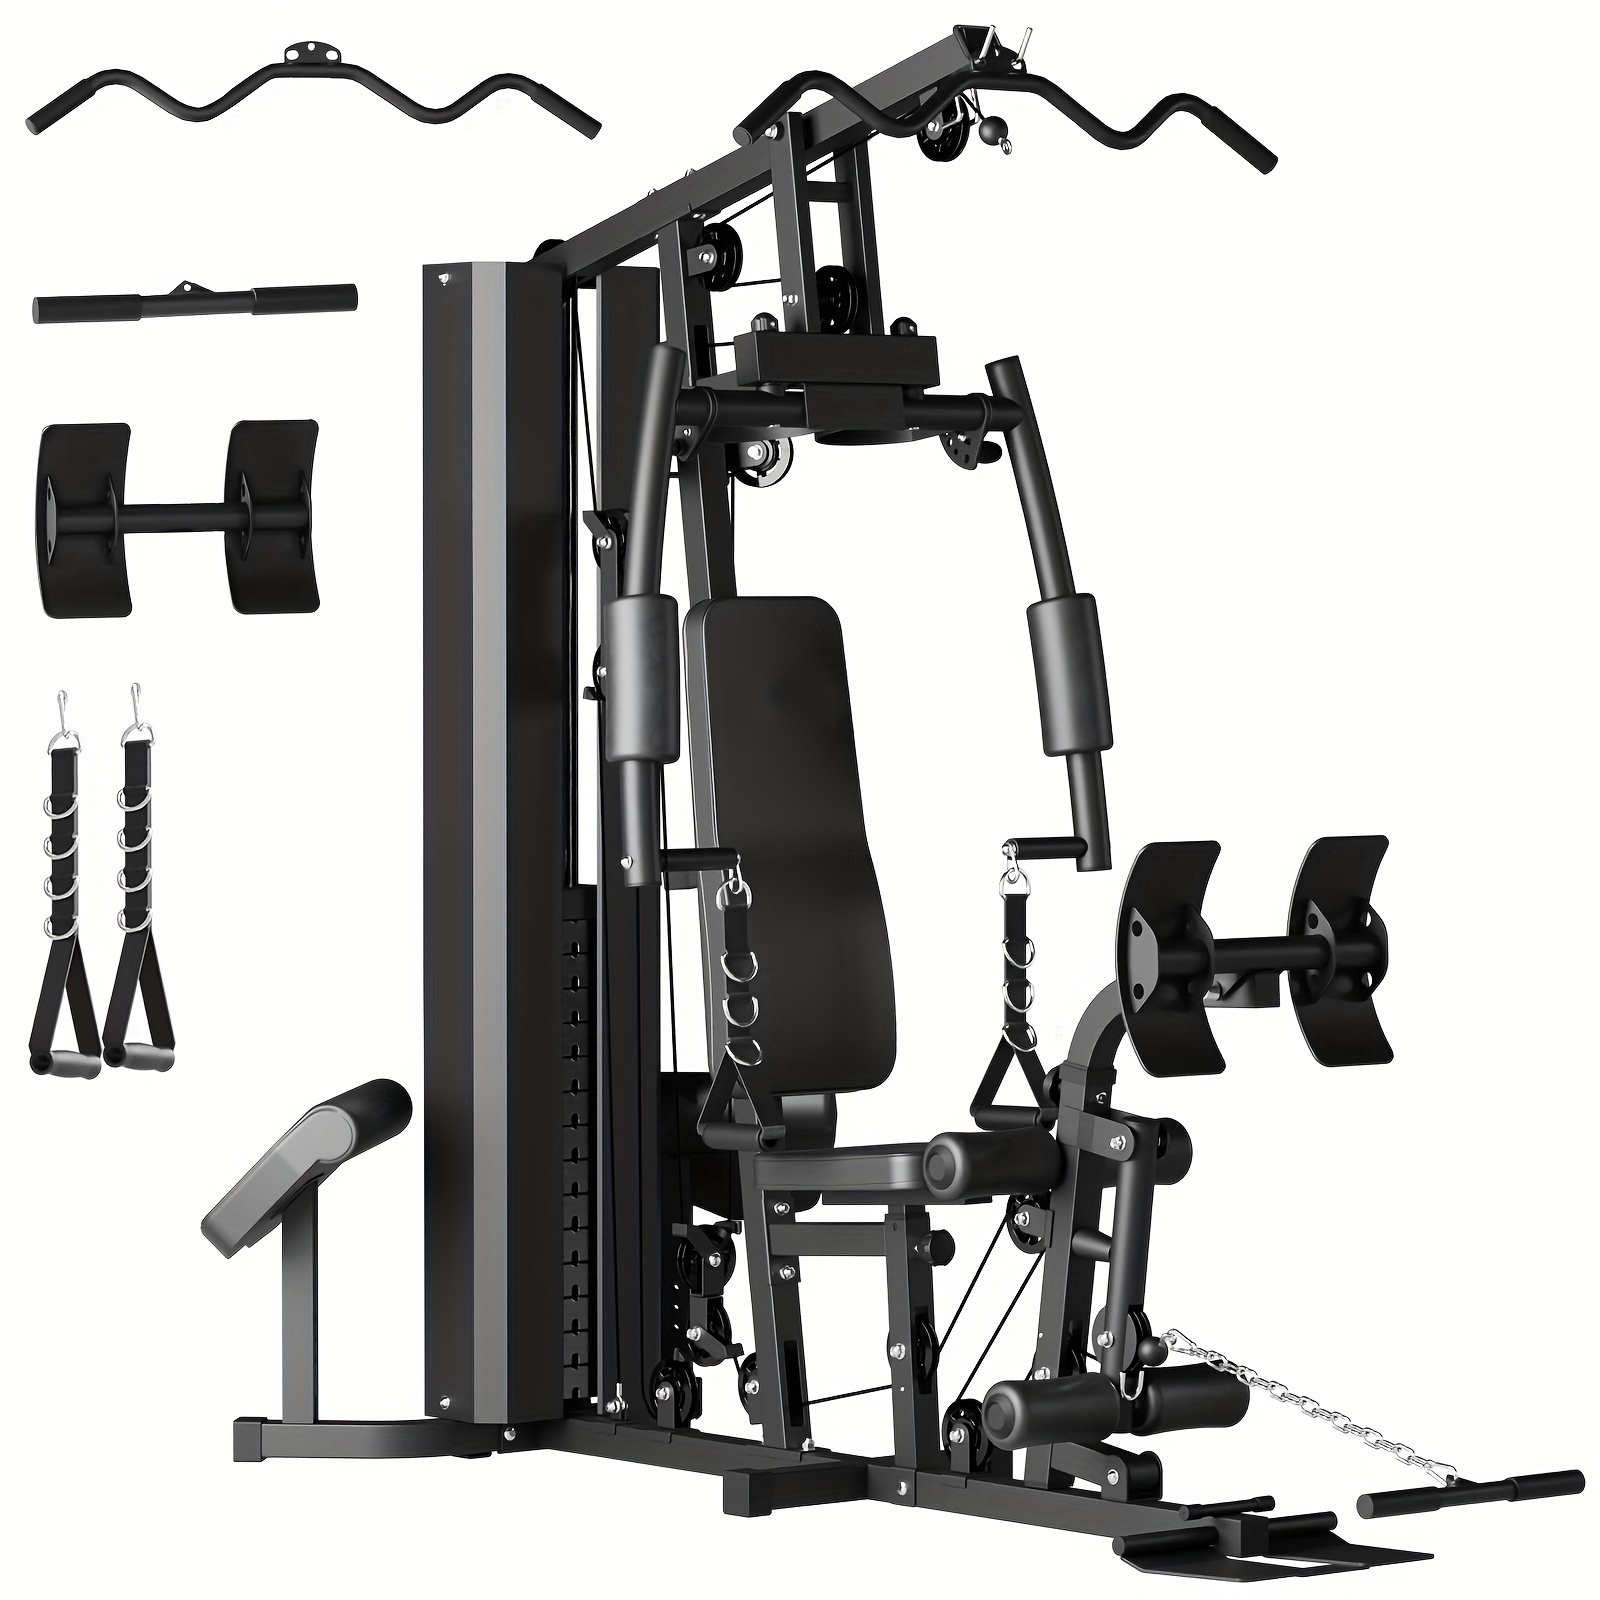 

Home Gym Station, Workout Station With 150lbs Weight Stack, Home Gym Equipment For All Body Training.